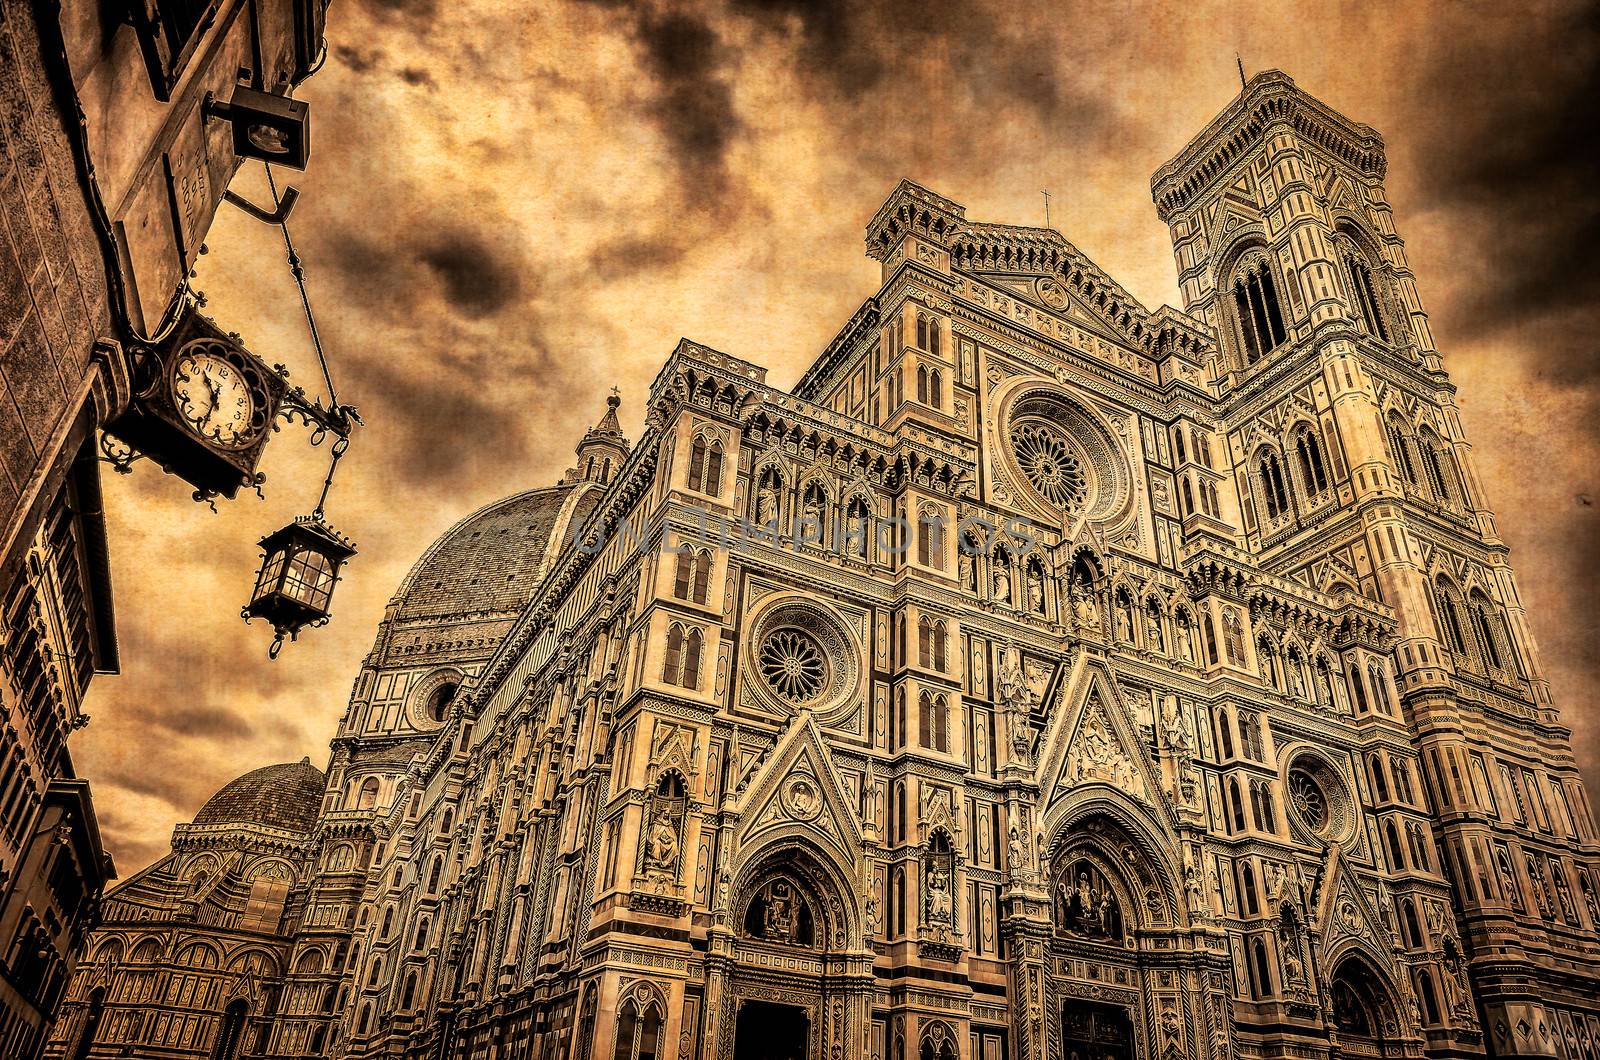 View of Florence Duomo cathedral and street clock, vintage style by martinm303